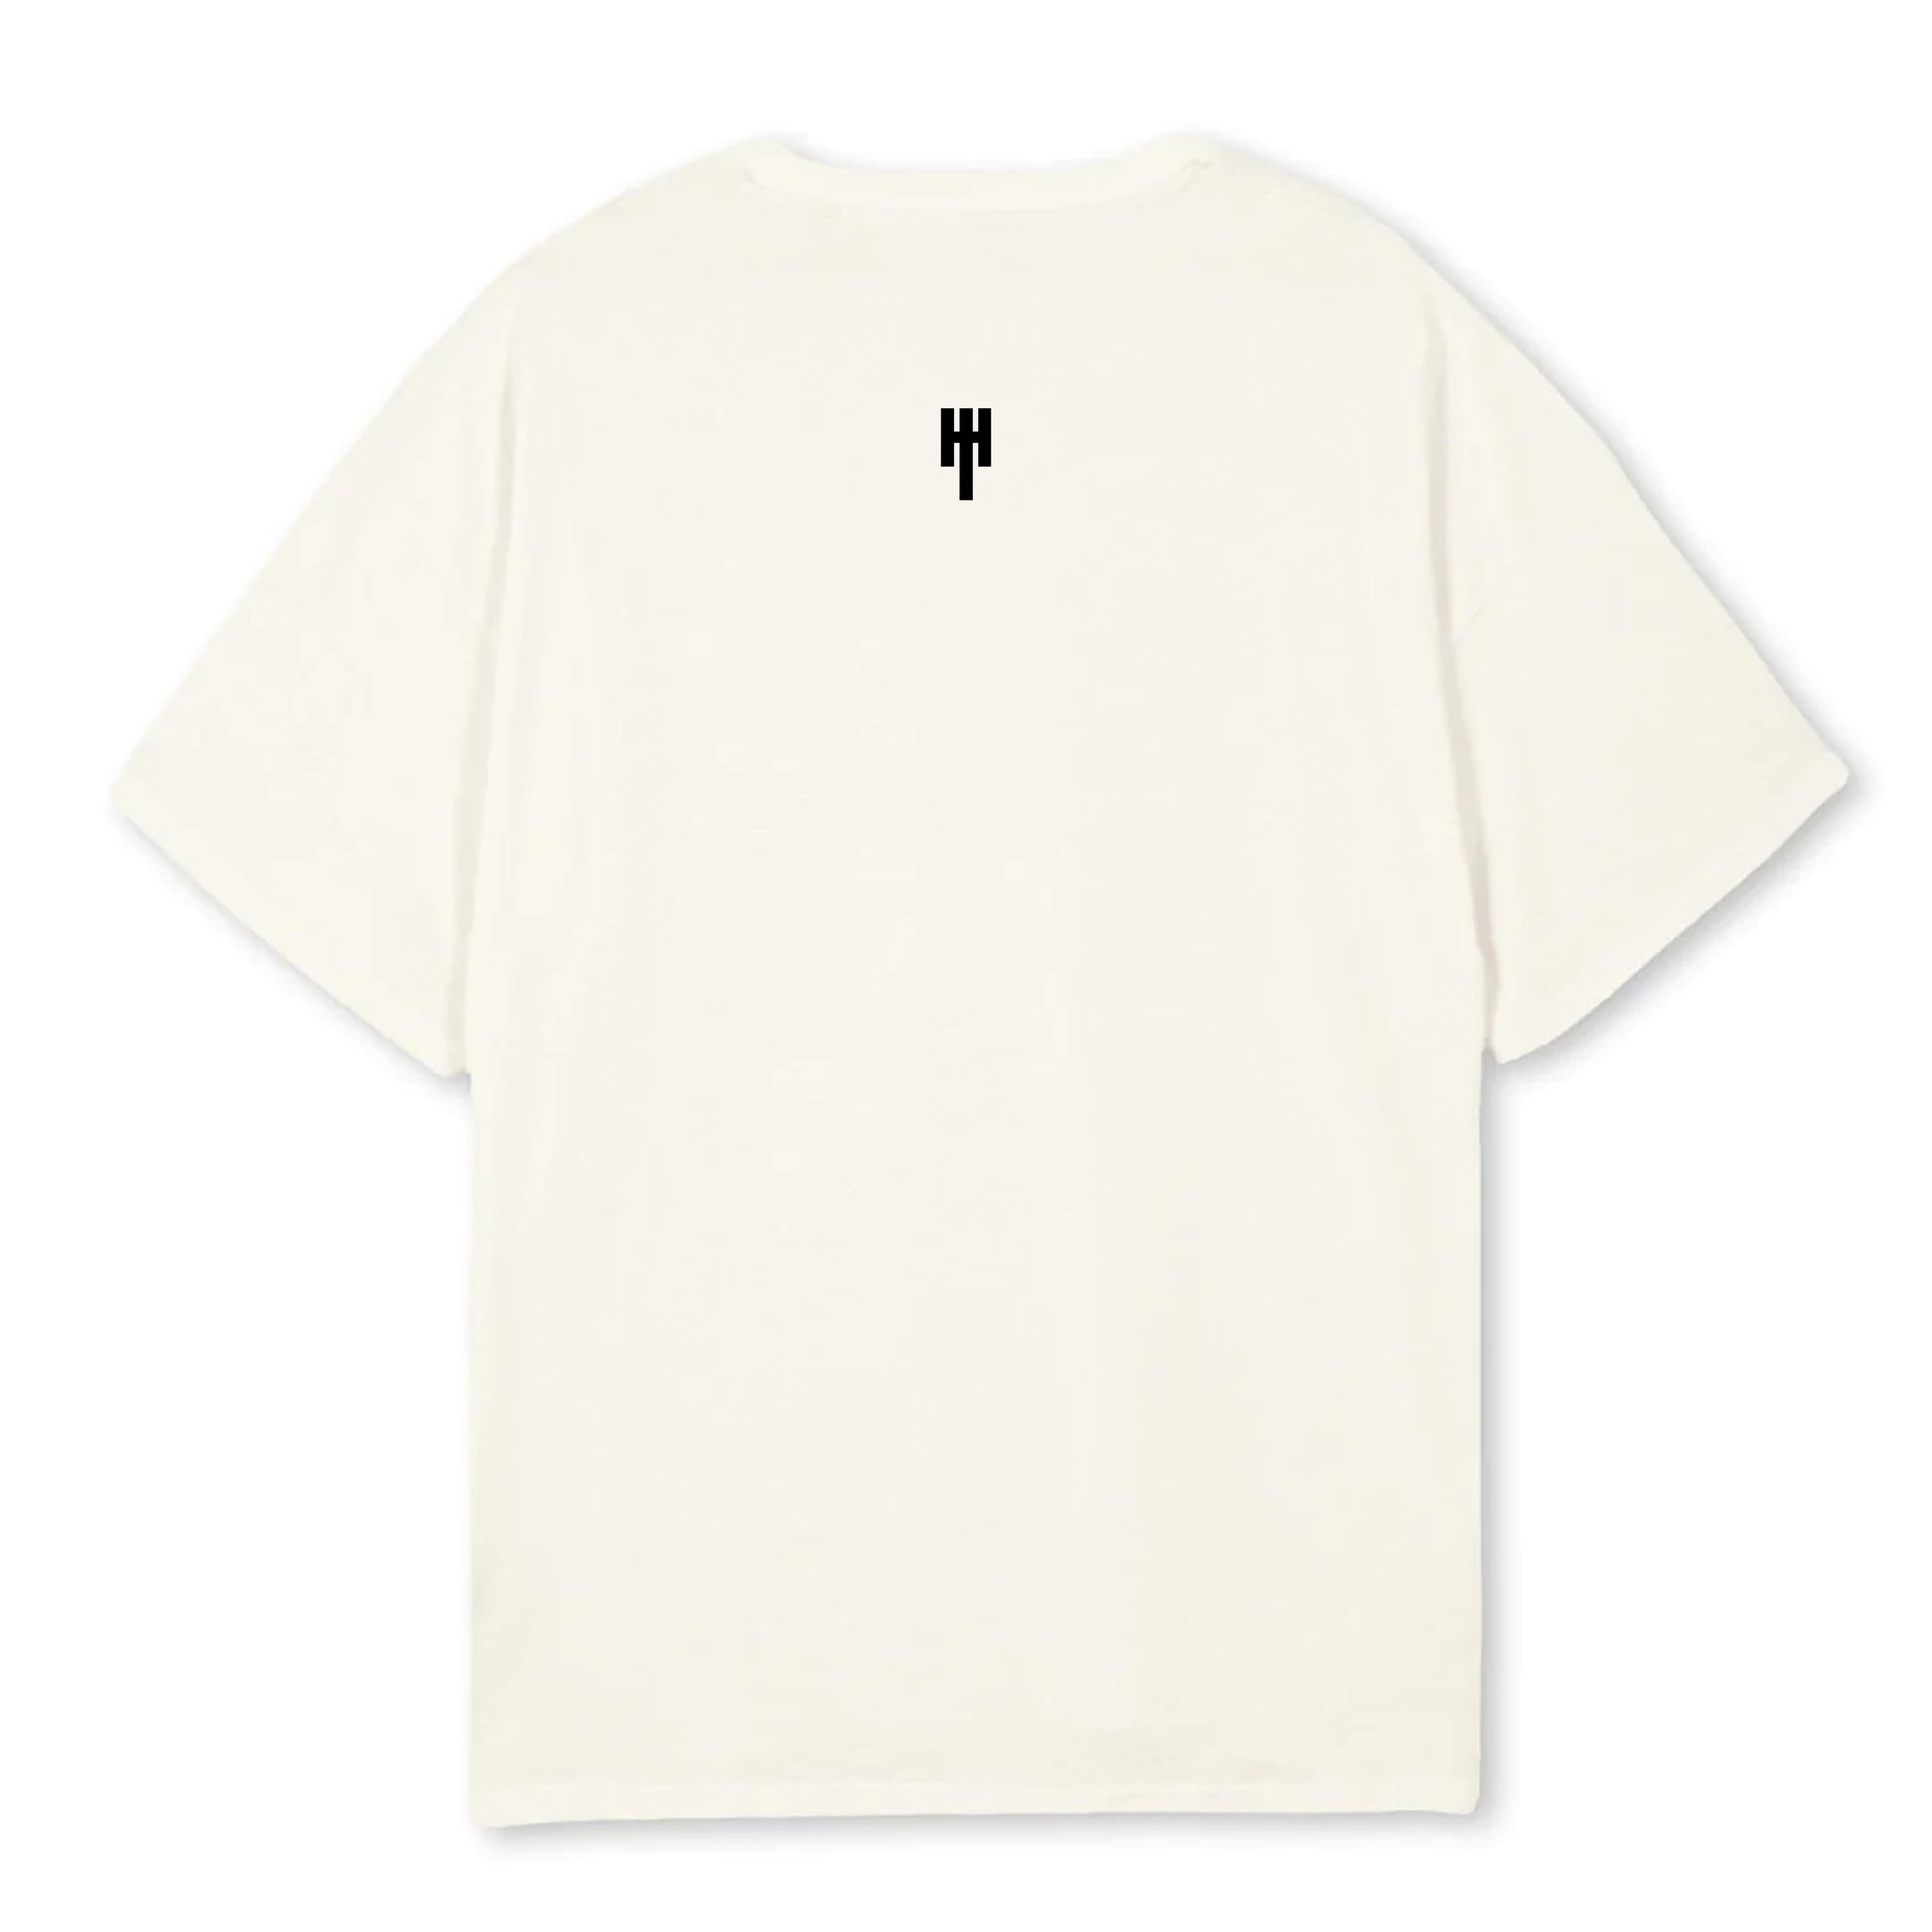 Back view of an oversized cream t-shirt with our company emblem centered beneath the neckline.